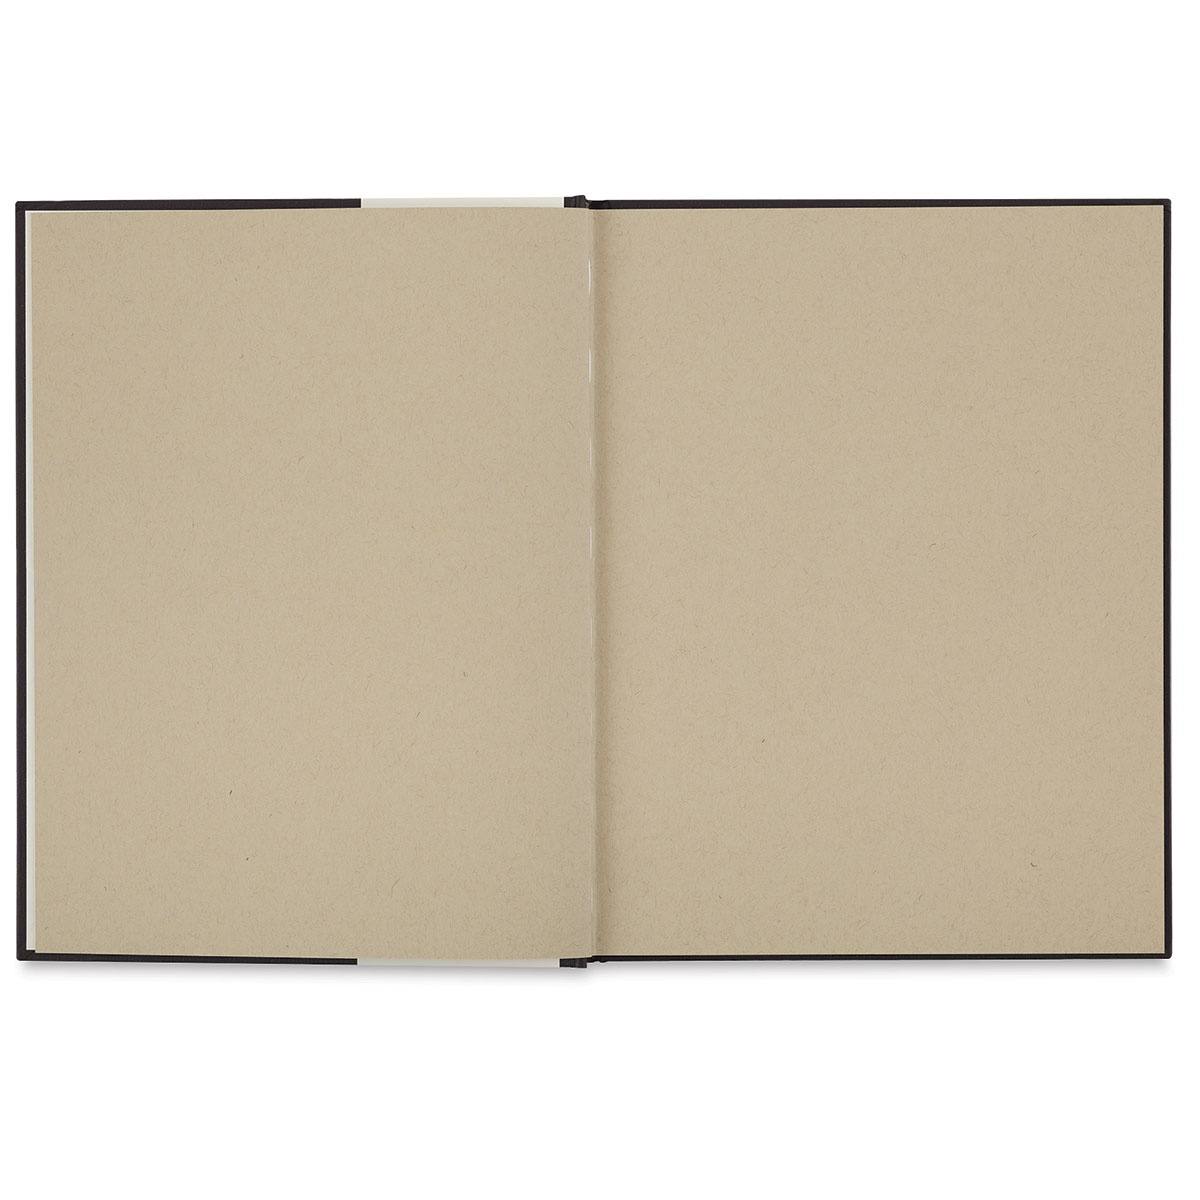 Strathmore 400 Series Hardbound Toned Mixed Media Artist Journal - Gray,  5-1/2'' x 8-1/2'', 48 pages